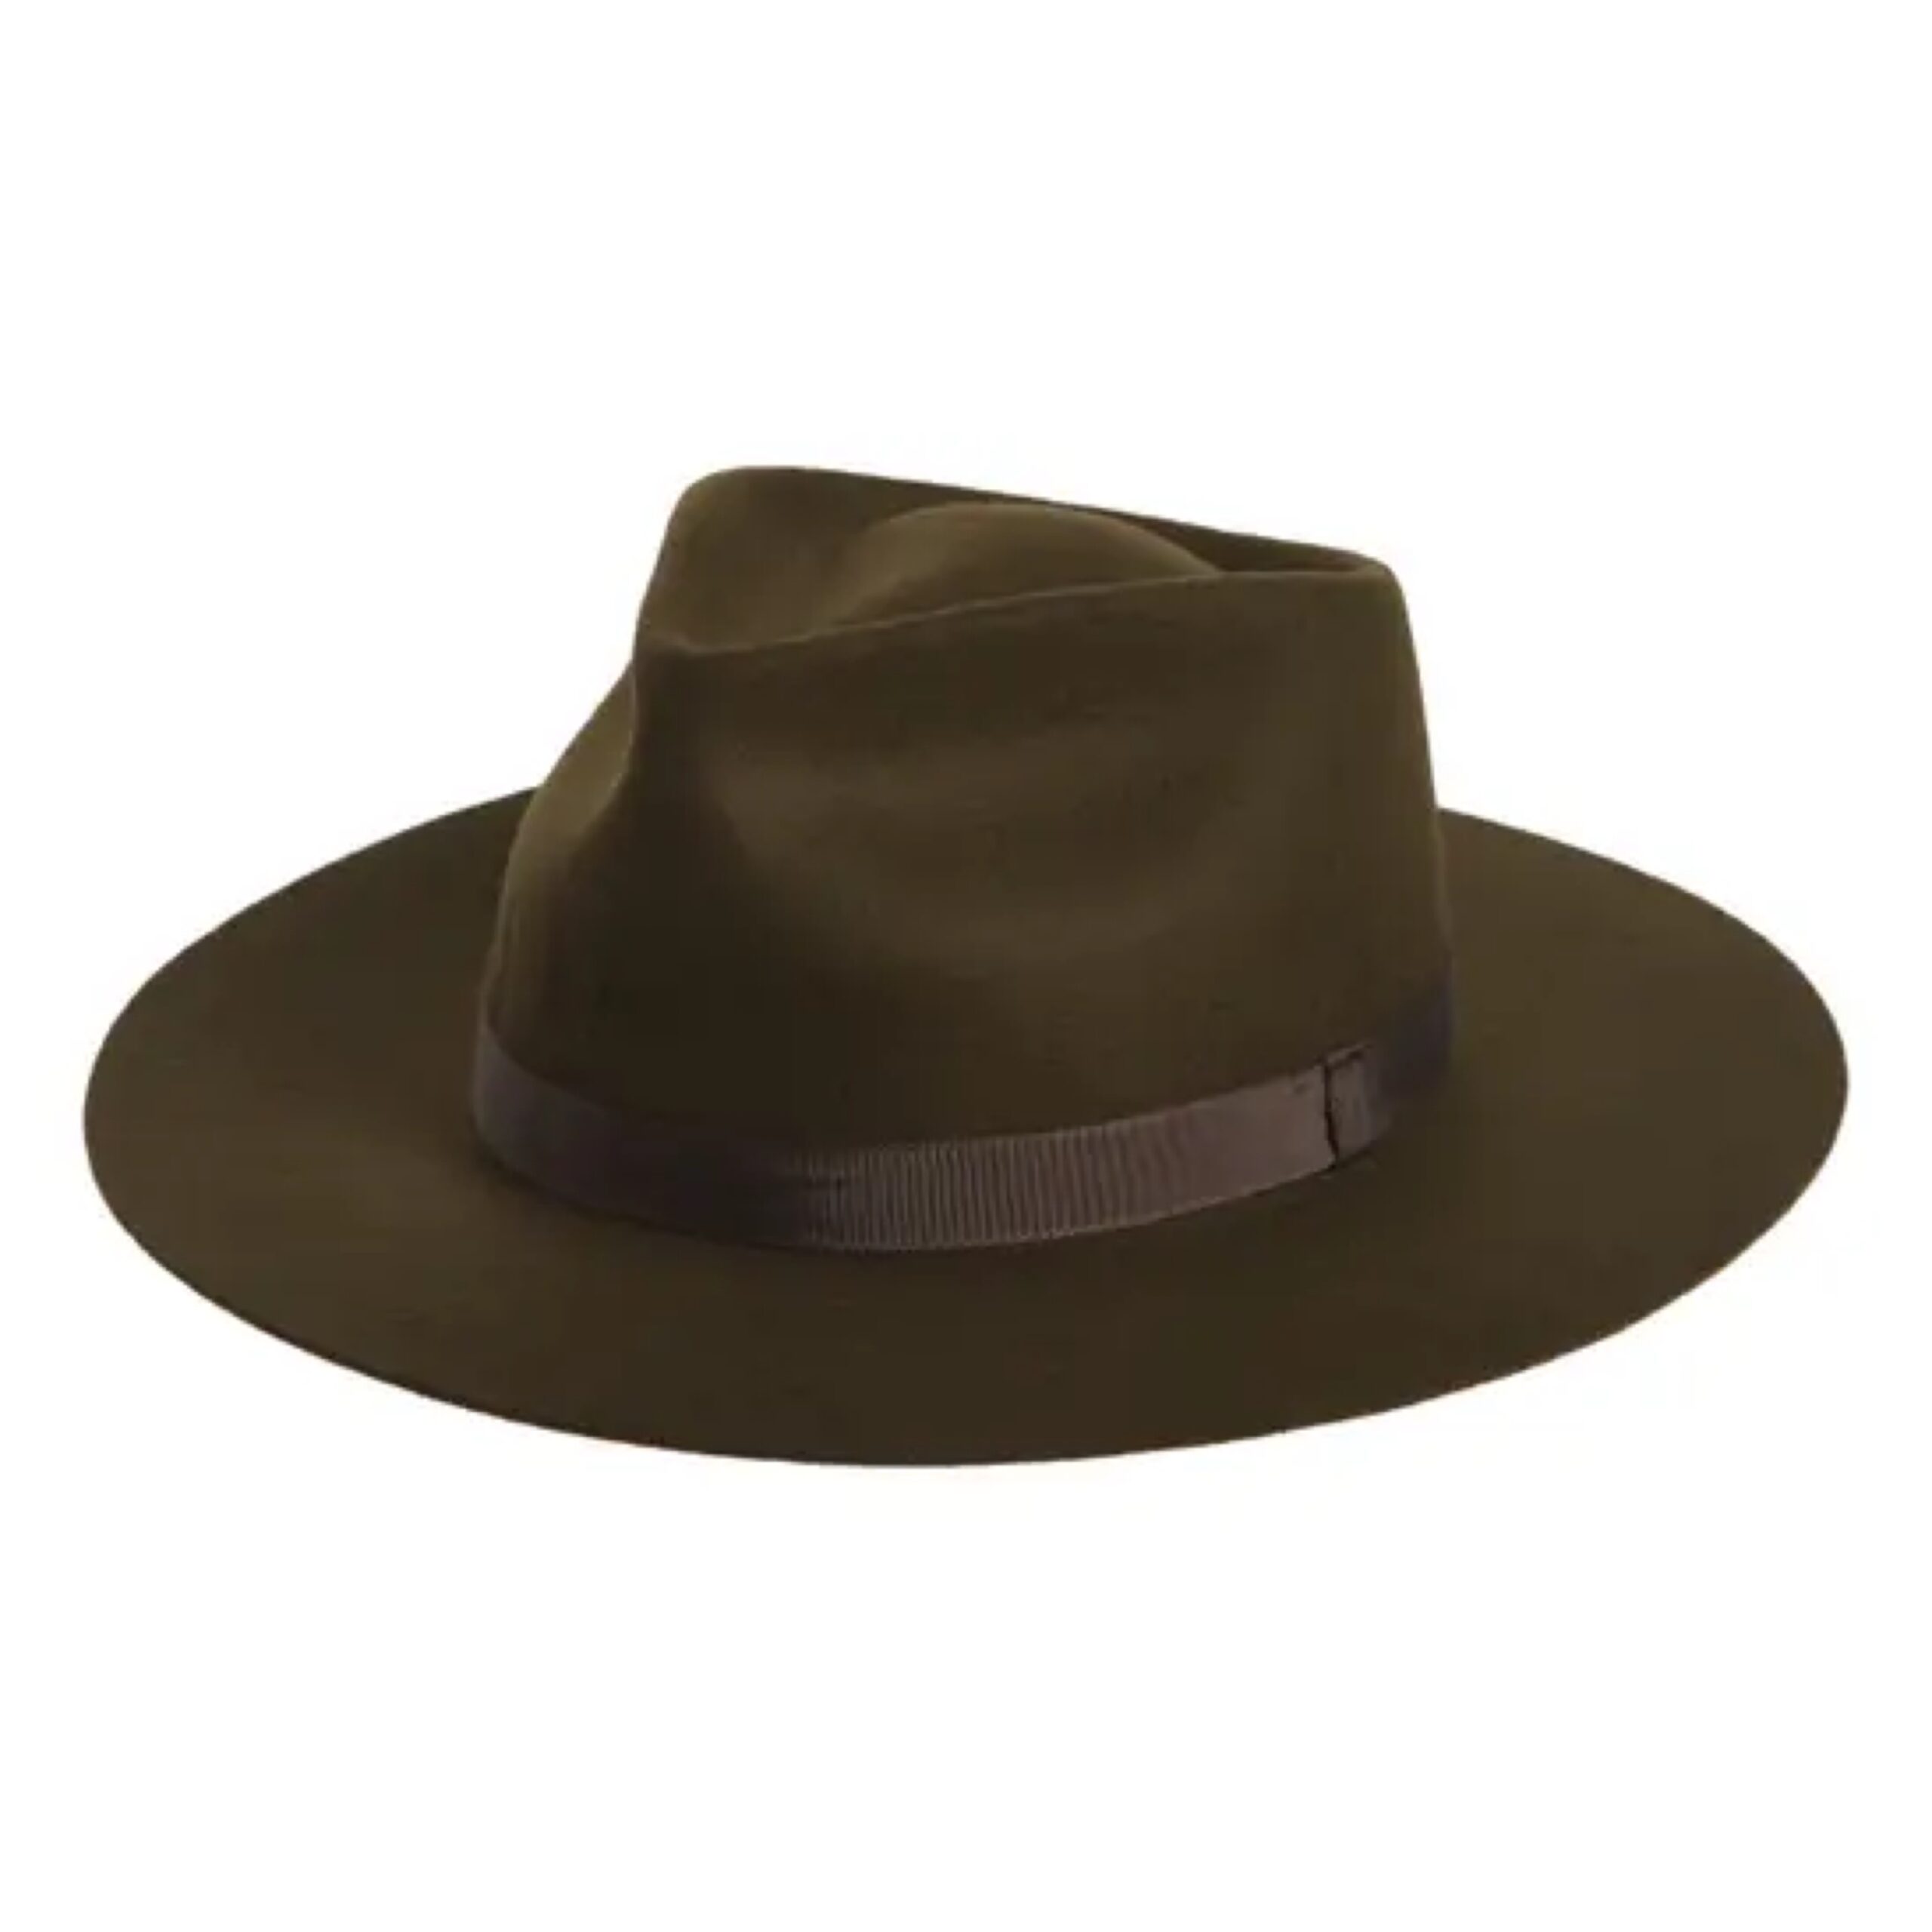 Dr-Tumbletys-apothecary-inspired-by-spirits-distilling-co-pittsburgh-allentown-hilltop-goorin-bros-brothers-hat-hats-dr-john-classic-fedora-flat-brim-pinched-olive-green